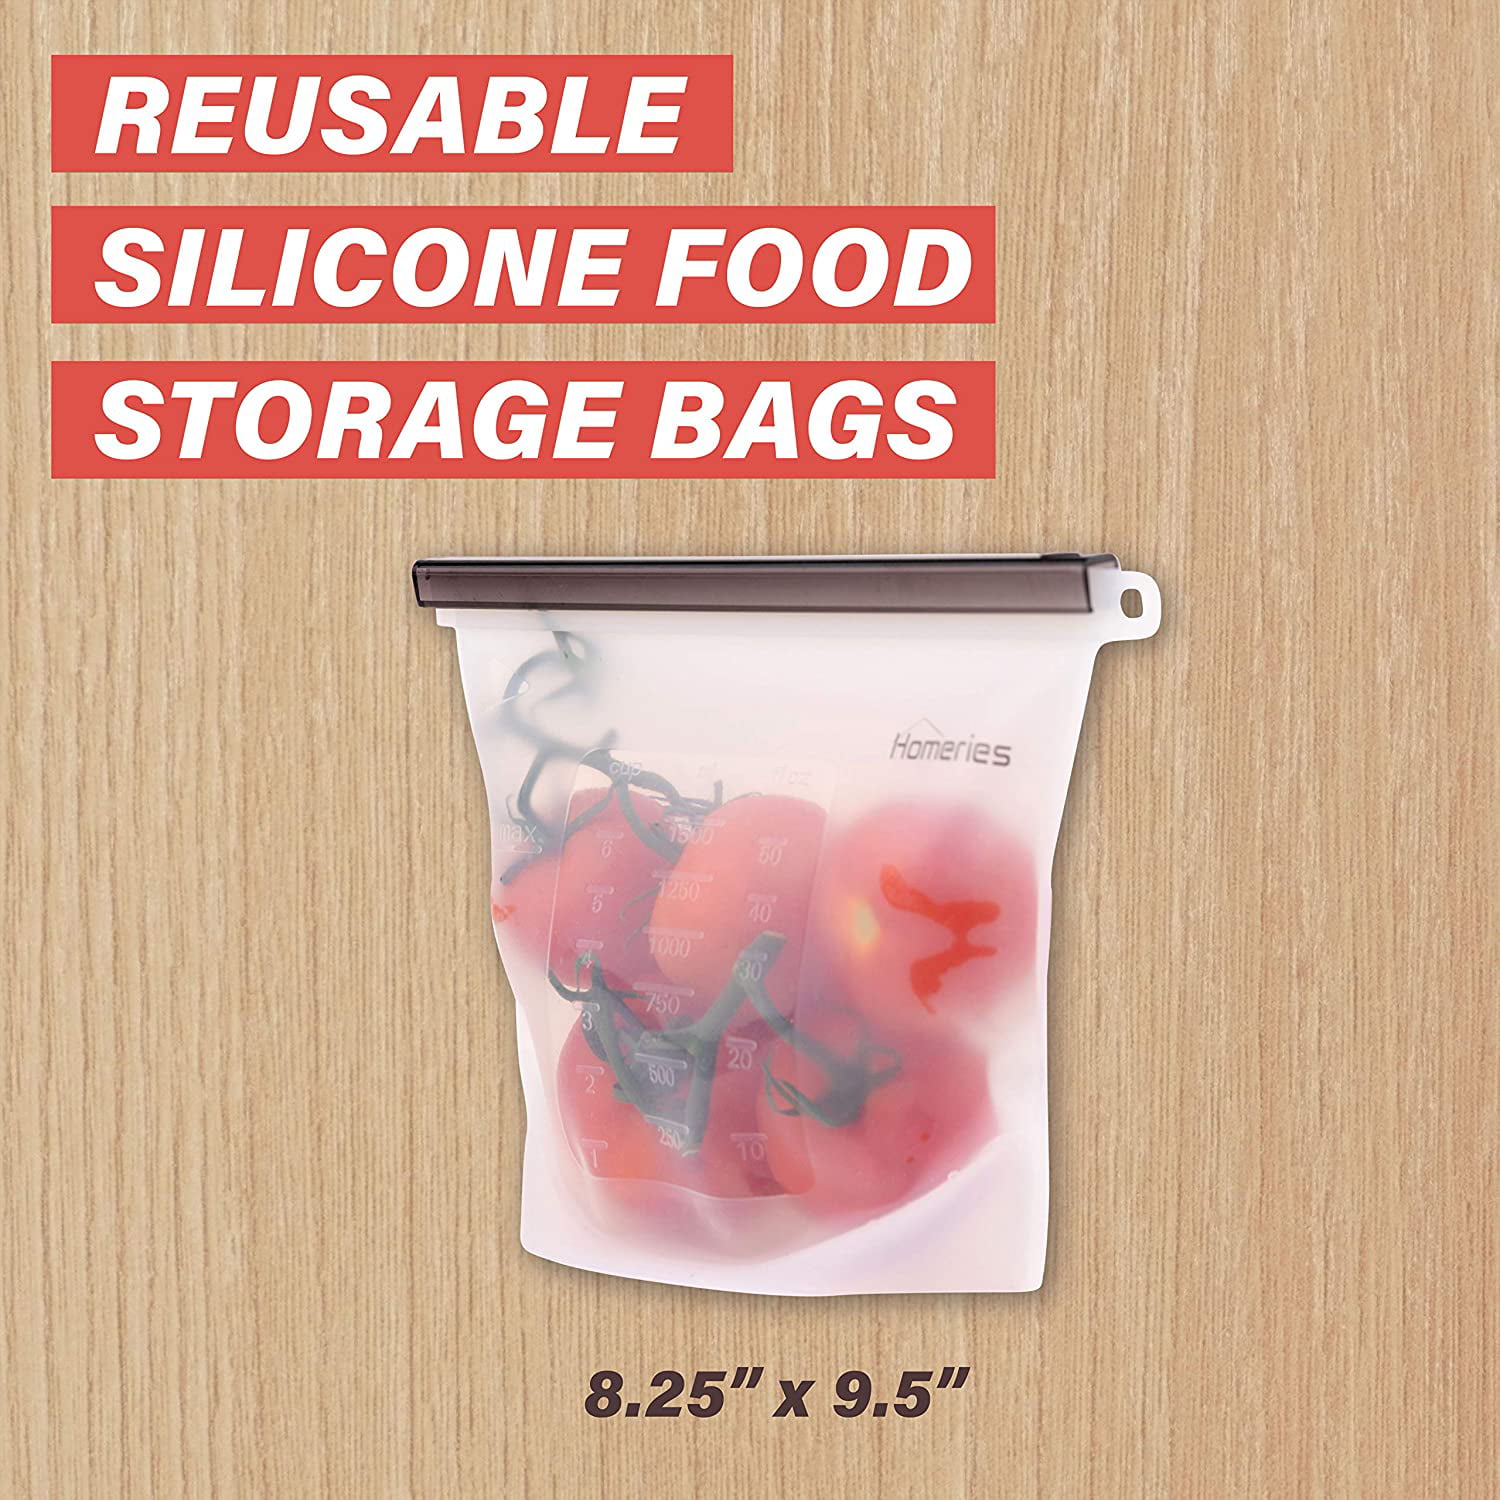 3 GALLON Large Regular Roaster Food Storage Bags, Resealable Top, BIG 3.5  Gallon Size Plastic Bags, 16 x 18, Clear, Pool, Beach, Hiking, Camping